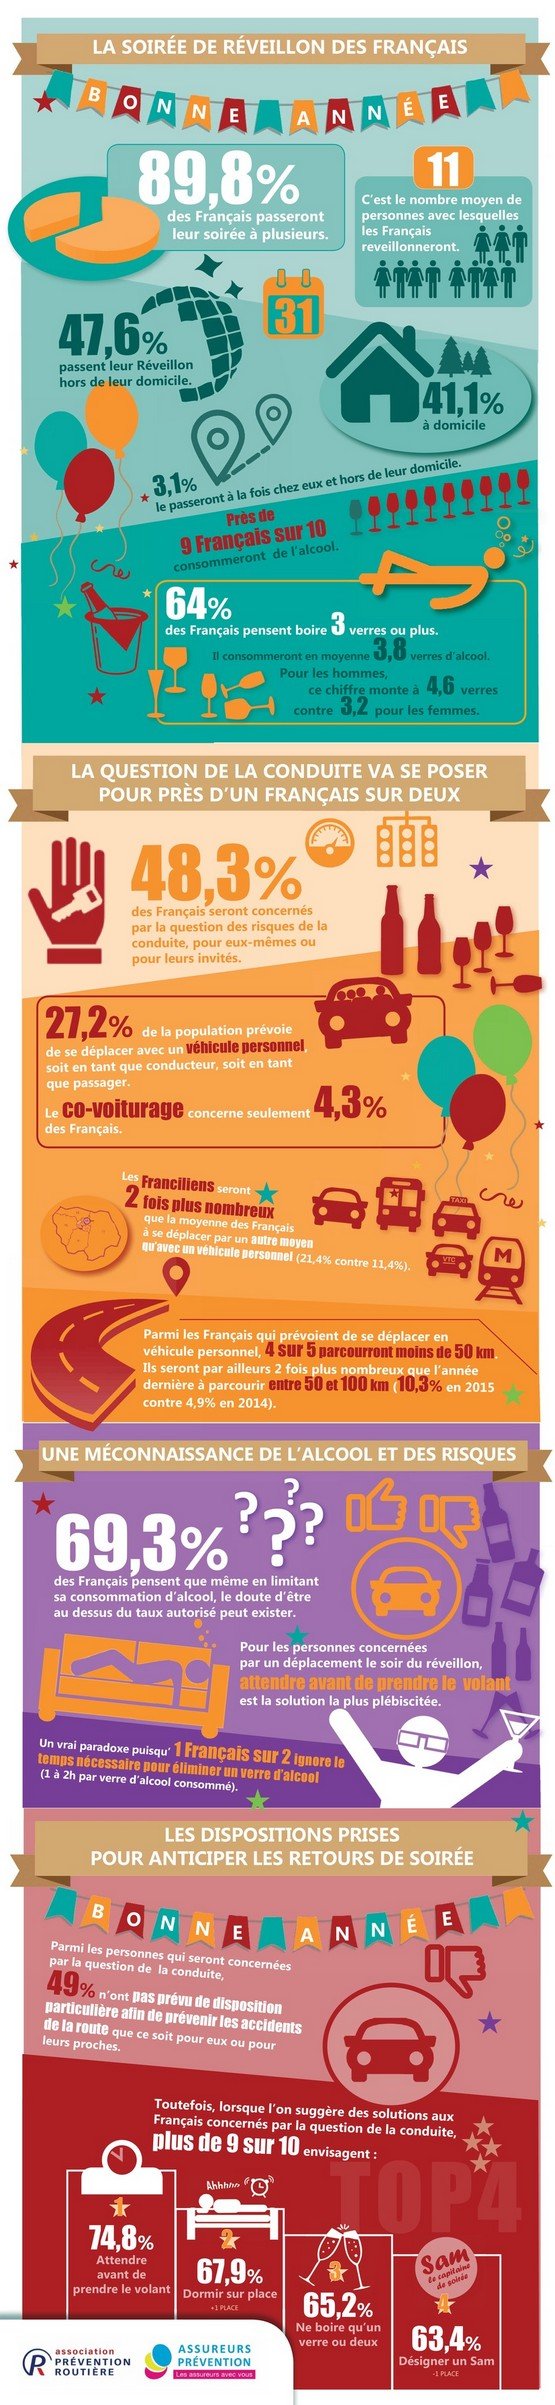 infographie_mde_2015x555